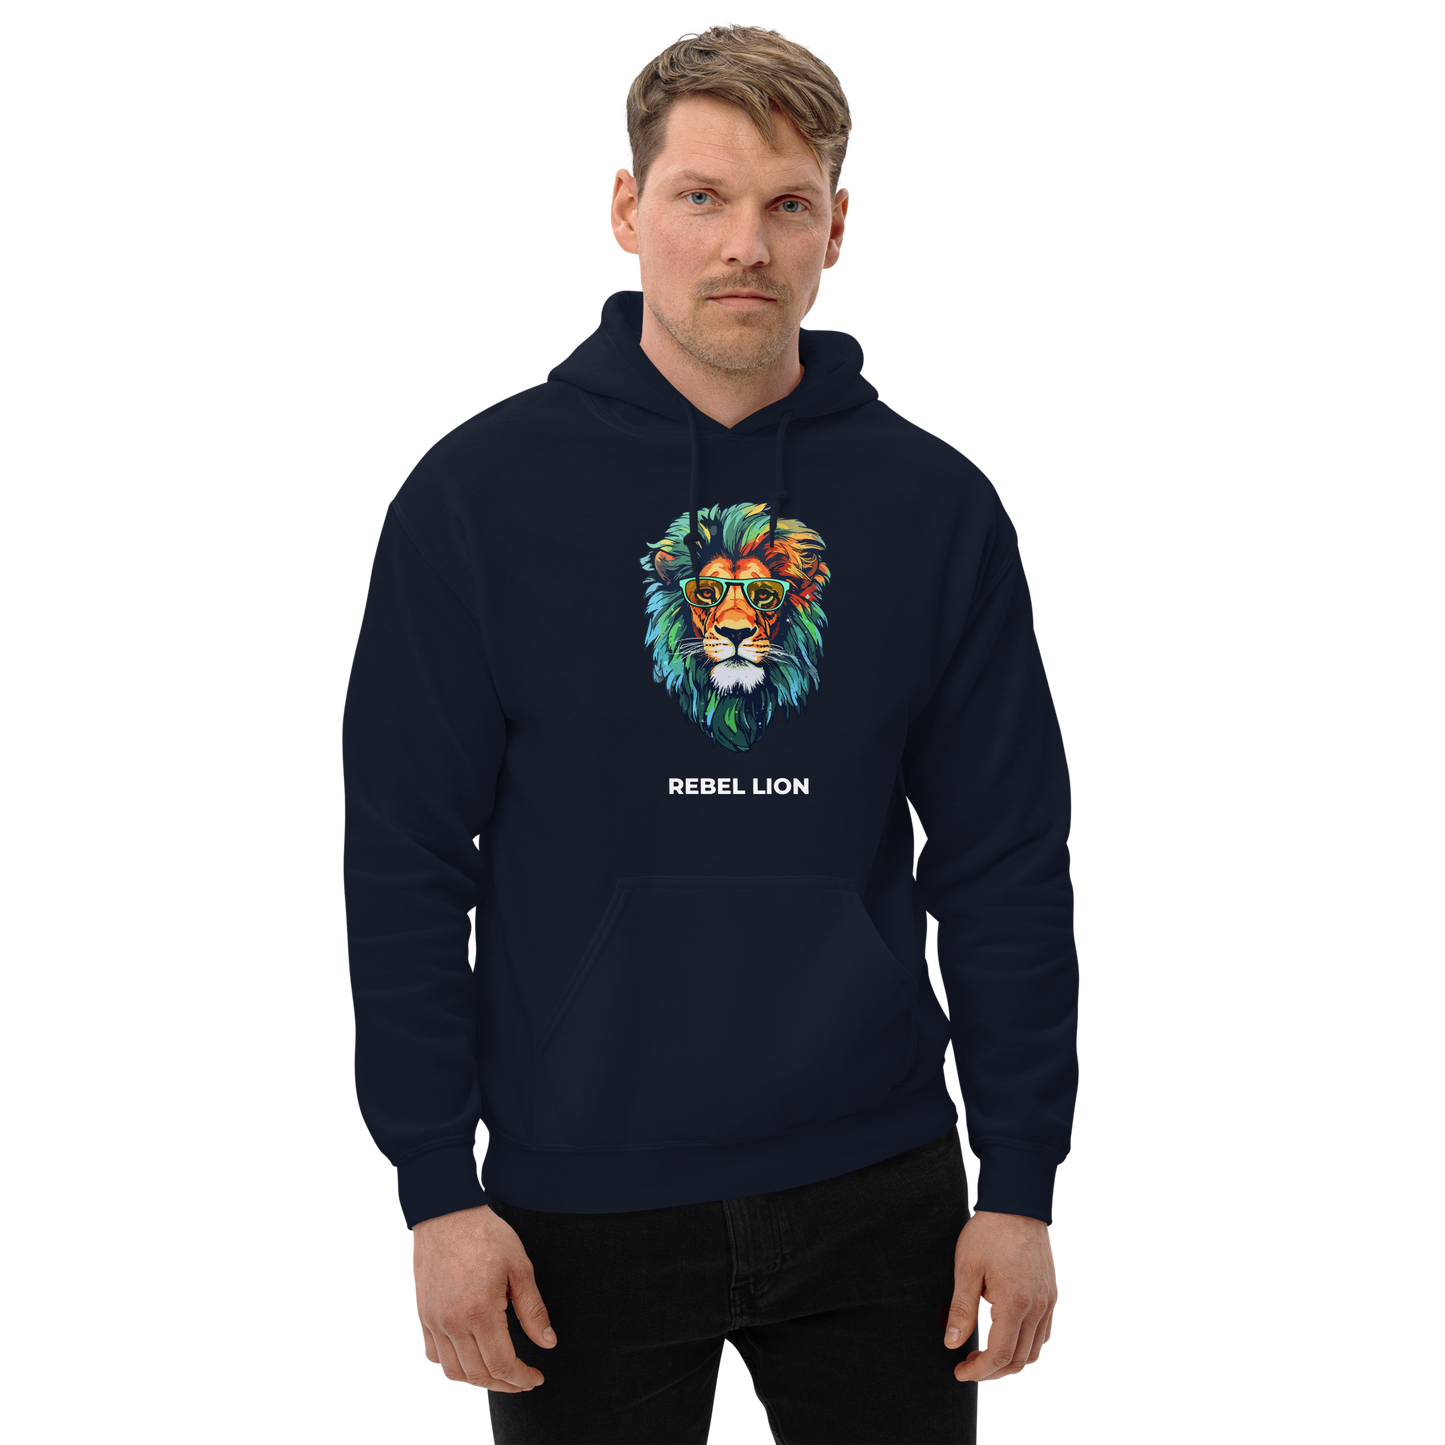 Man wearing a Navy Lion Hoodie featuring a fierce Rebel Lion graphic on the chest - Funny Graphic Lion Hoodies - Boozy Fox